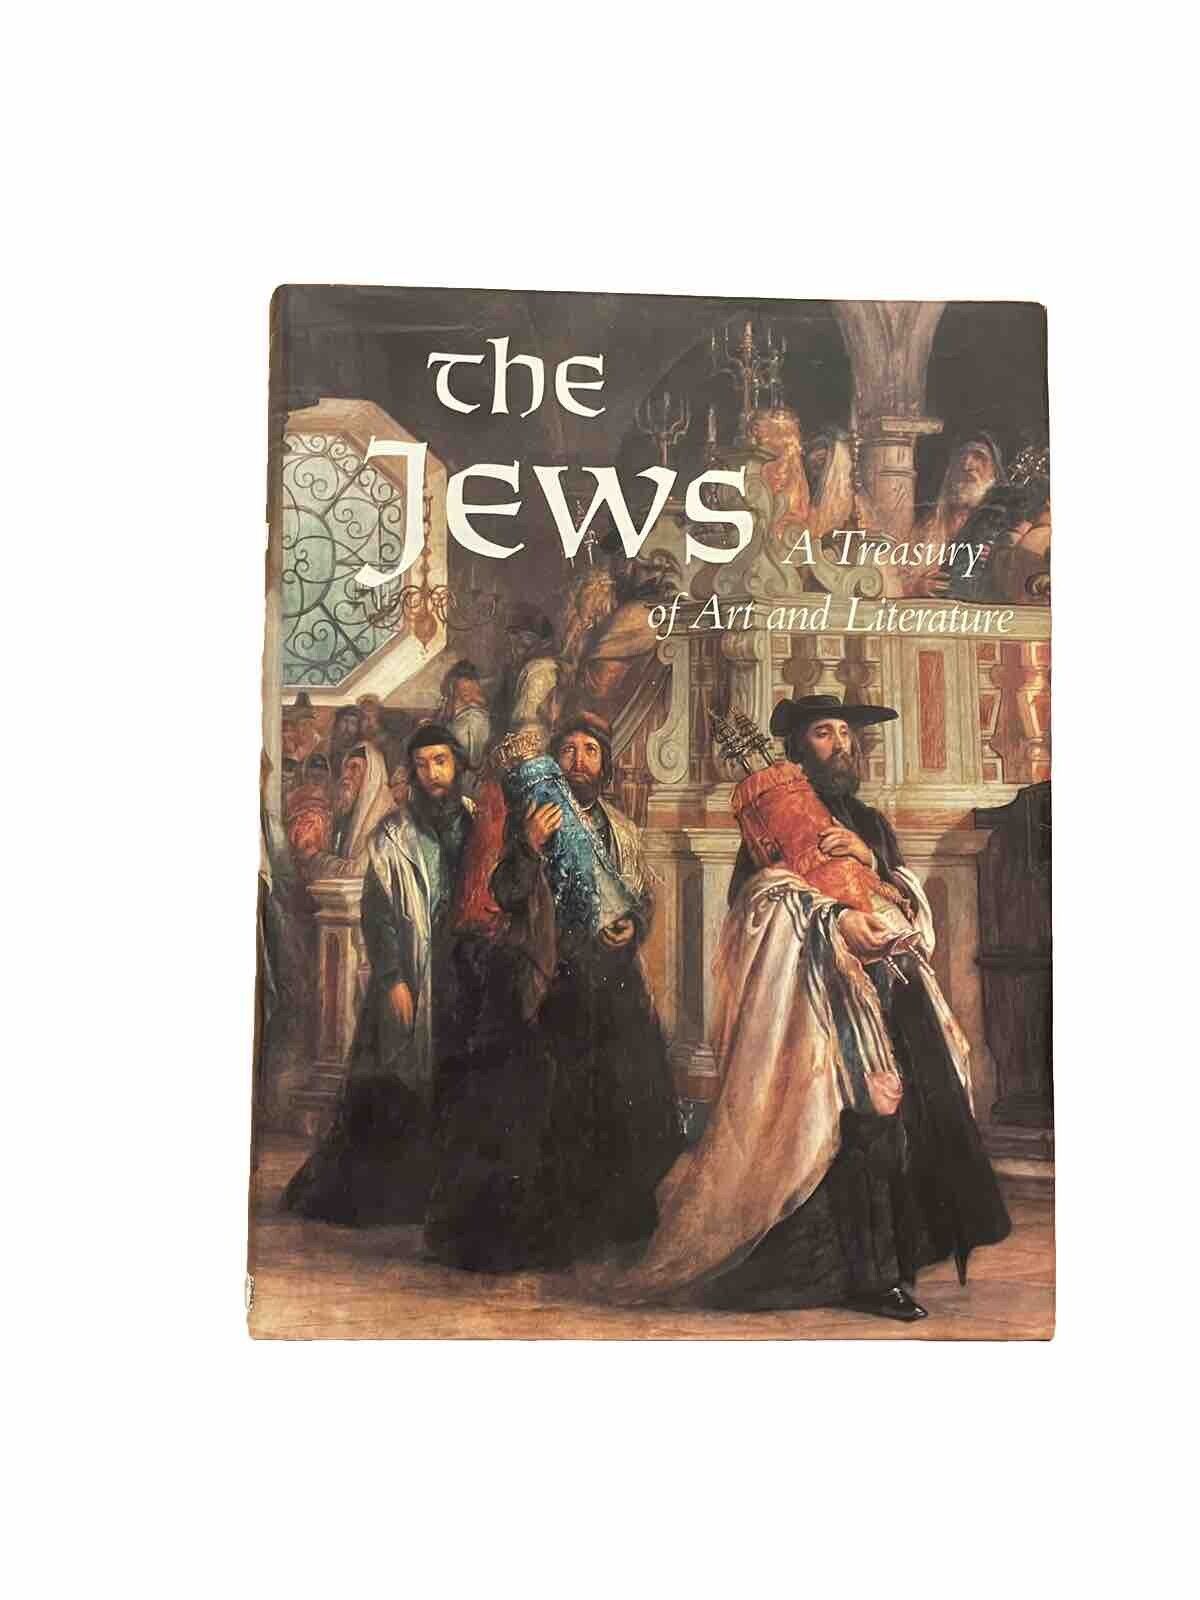 The Jews - A Treasury of Art and Literature -  384 pages - hardcover - 1st ed 